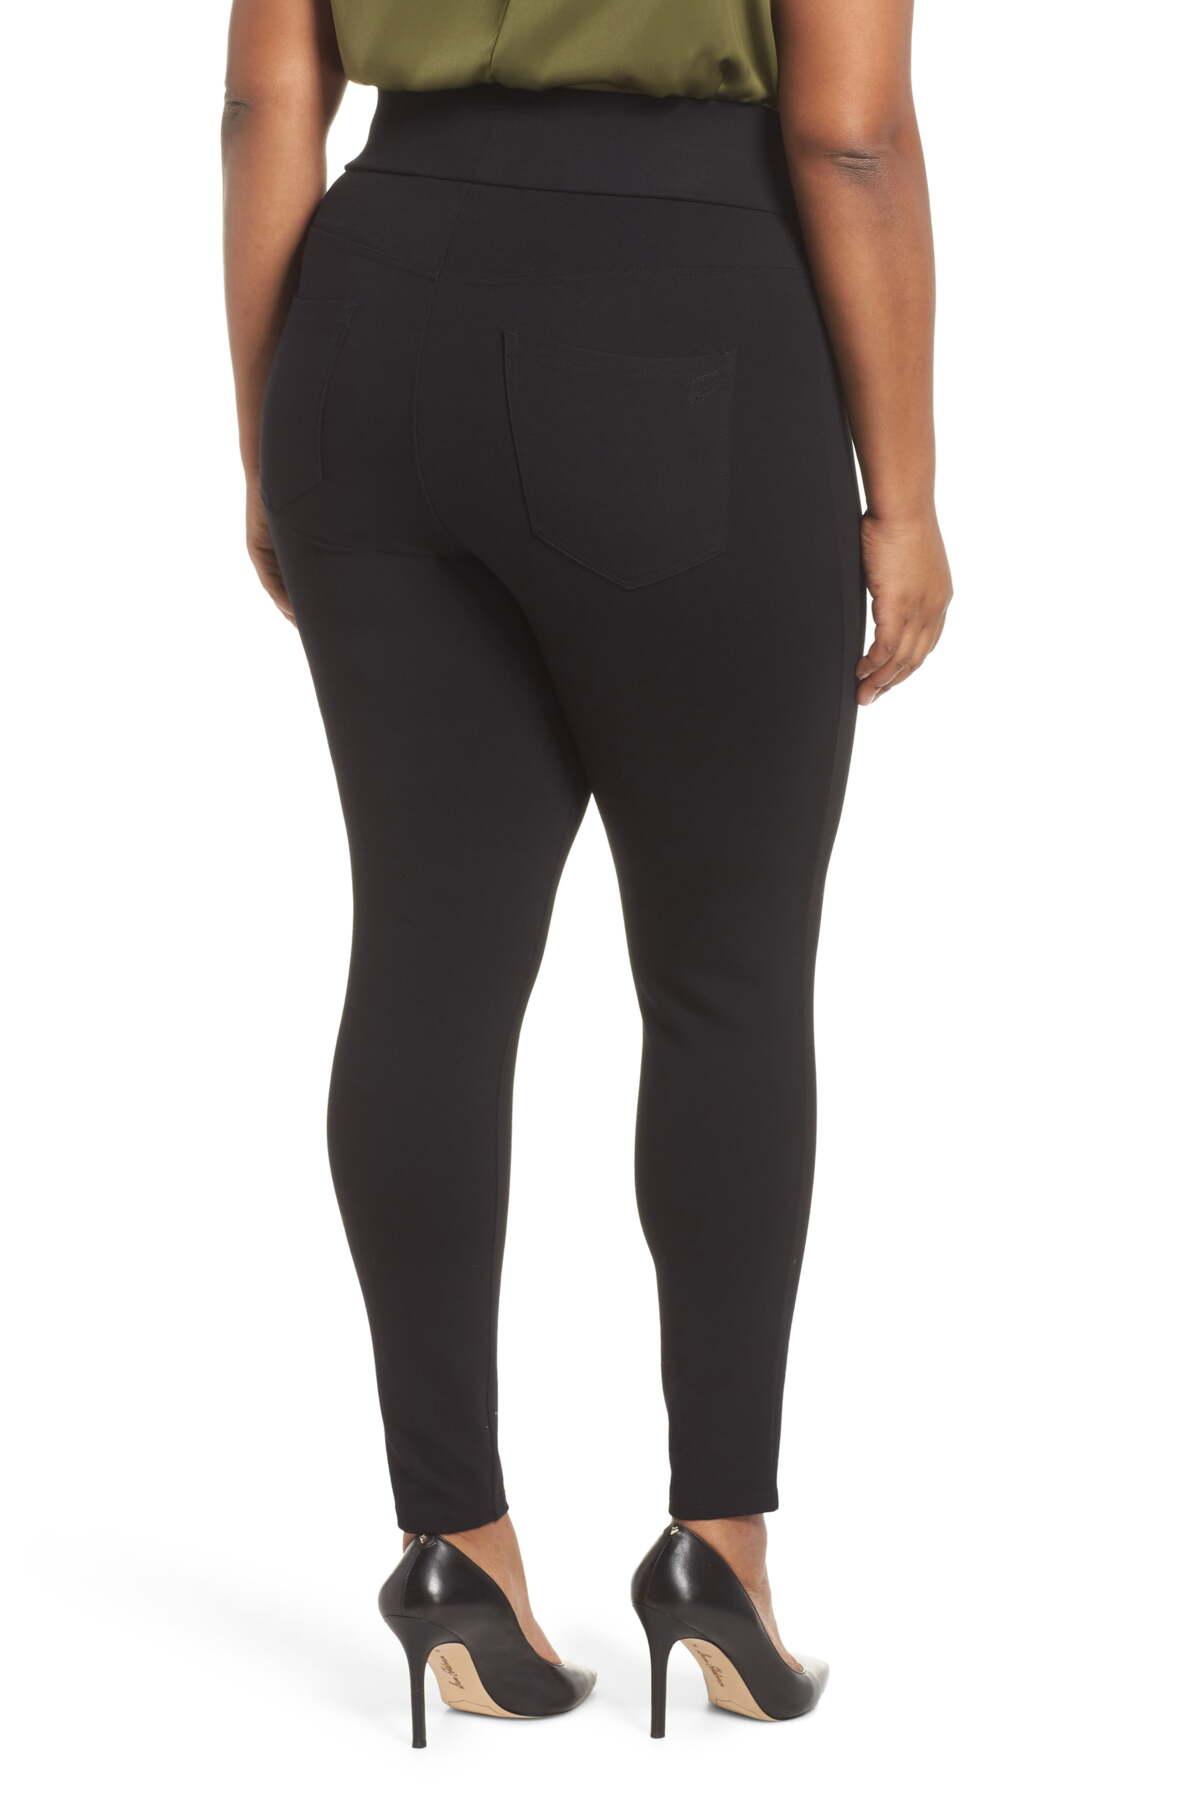 Seven7 Womens Plus Size High Rise Ponte Legging with India